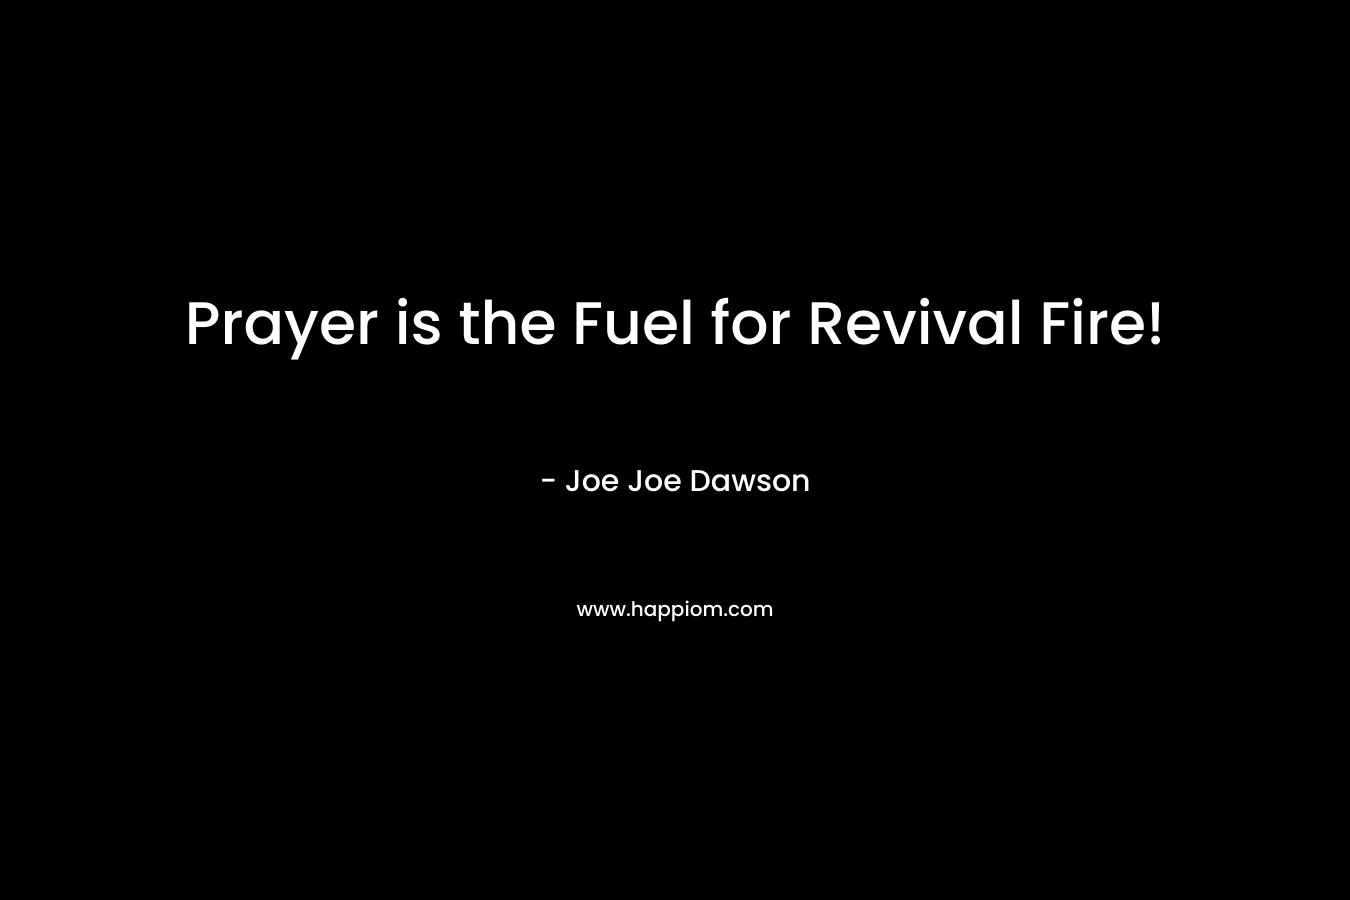 Prayer is the Fuel for Revival Fire!